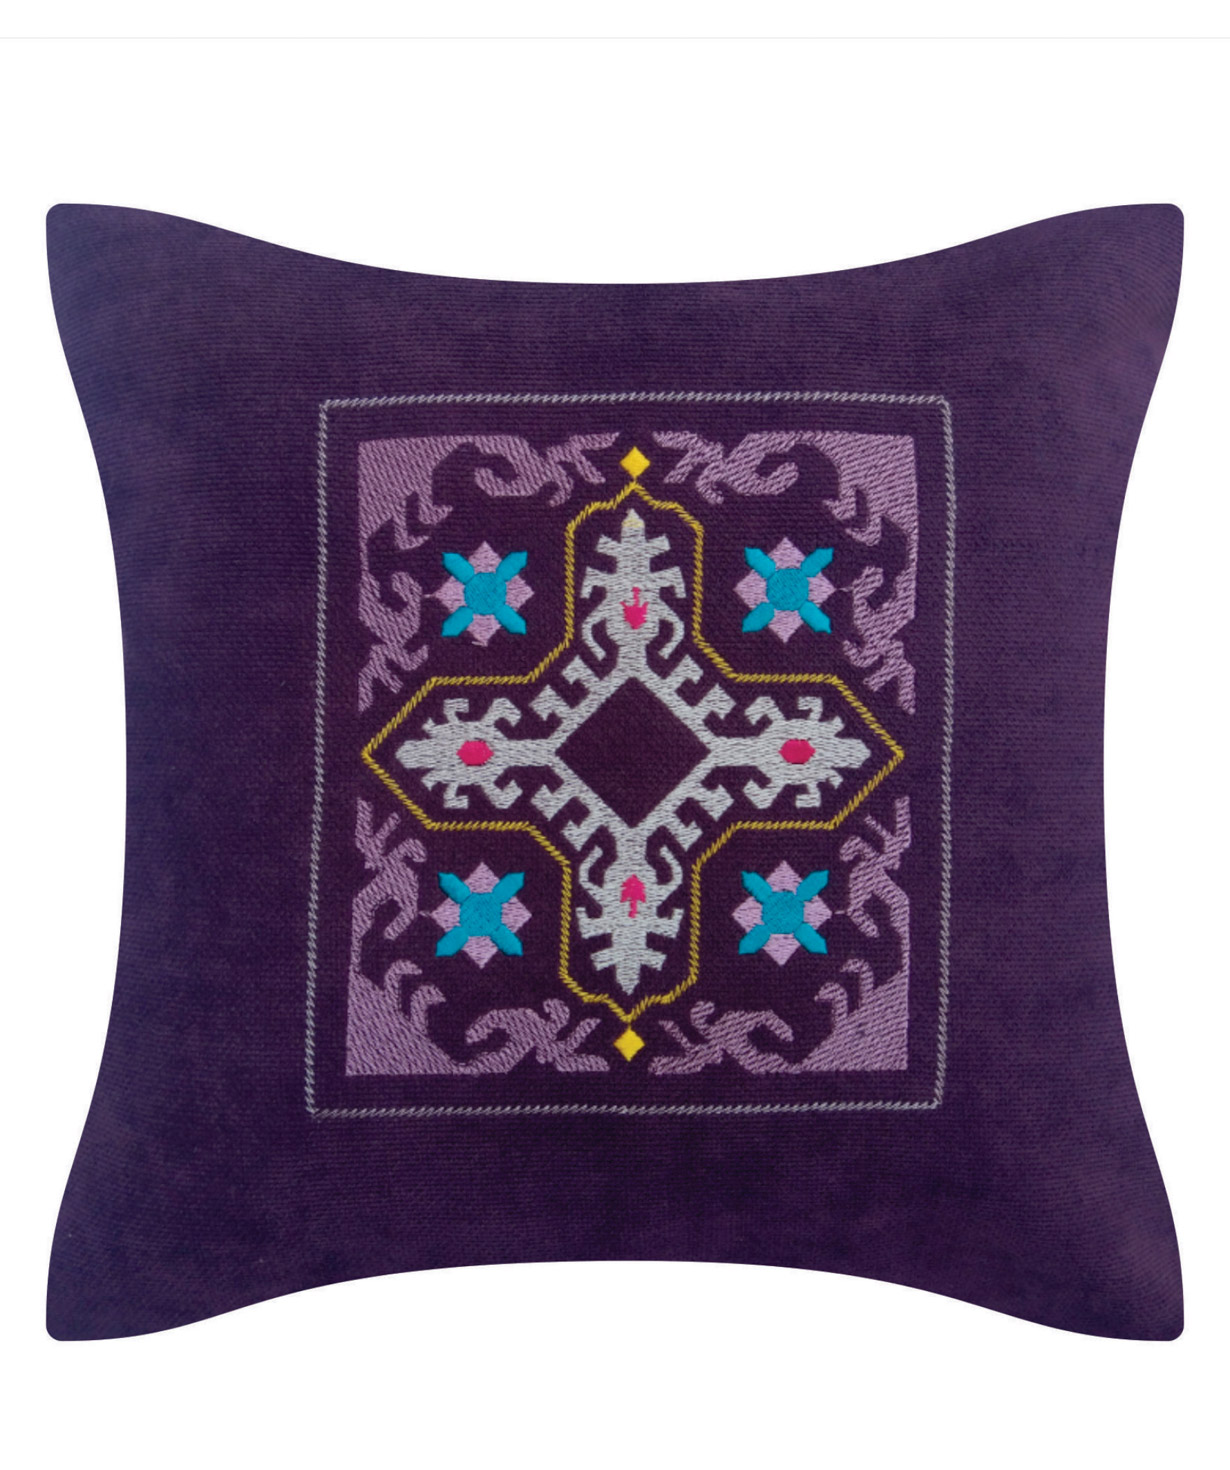 Pillow `Miskaryan heritage` embroidered with Armenian ornament №29